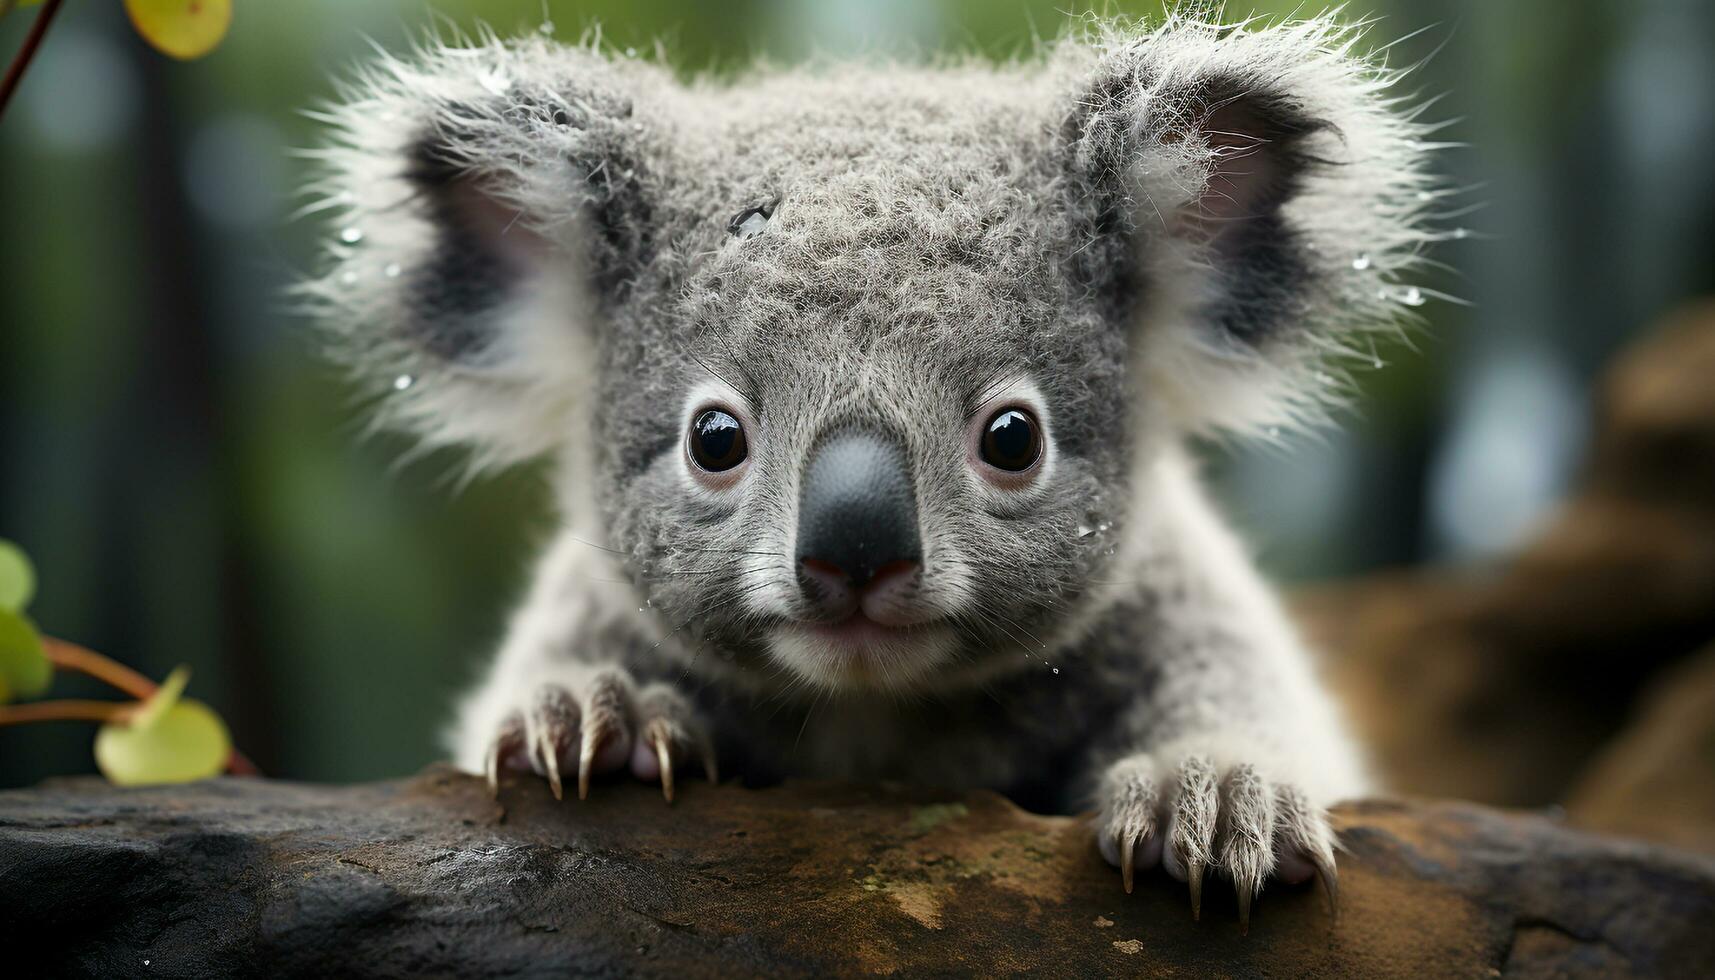 Cute koala, marsupial, endangered species, furry, looking at camera generated by AI photo